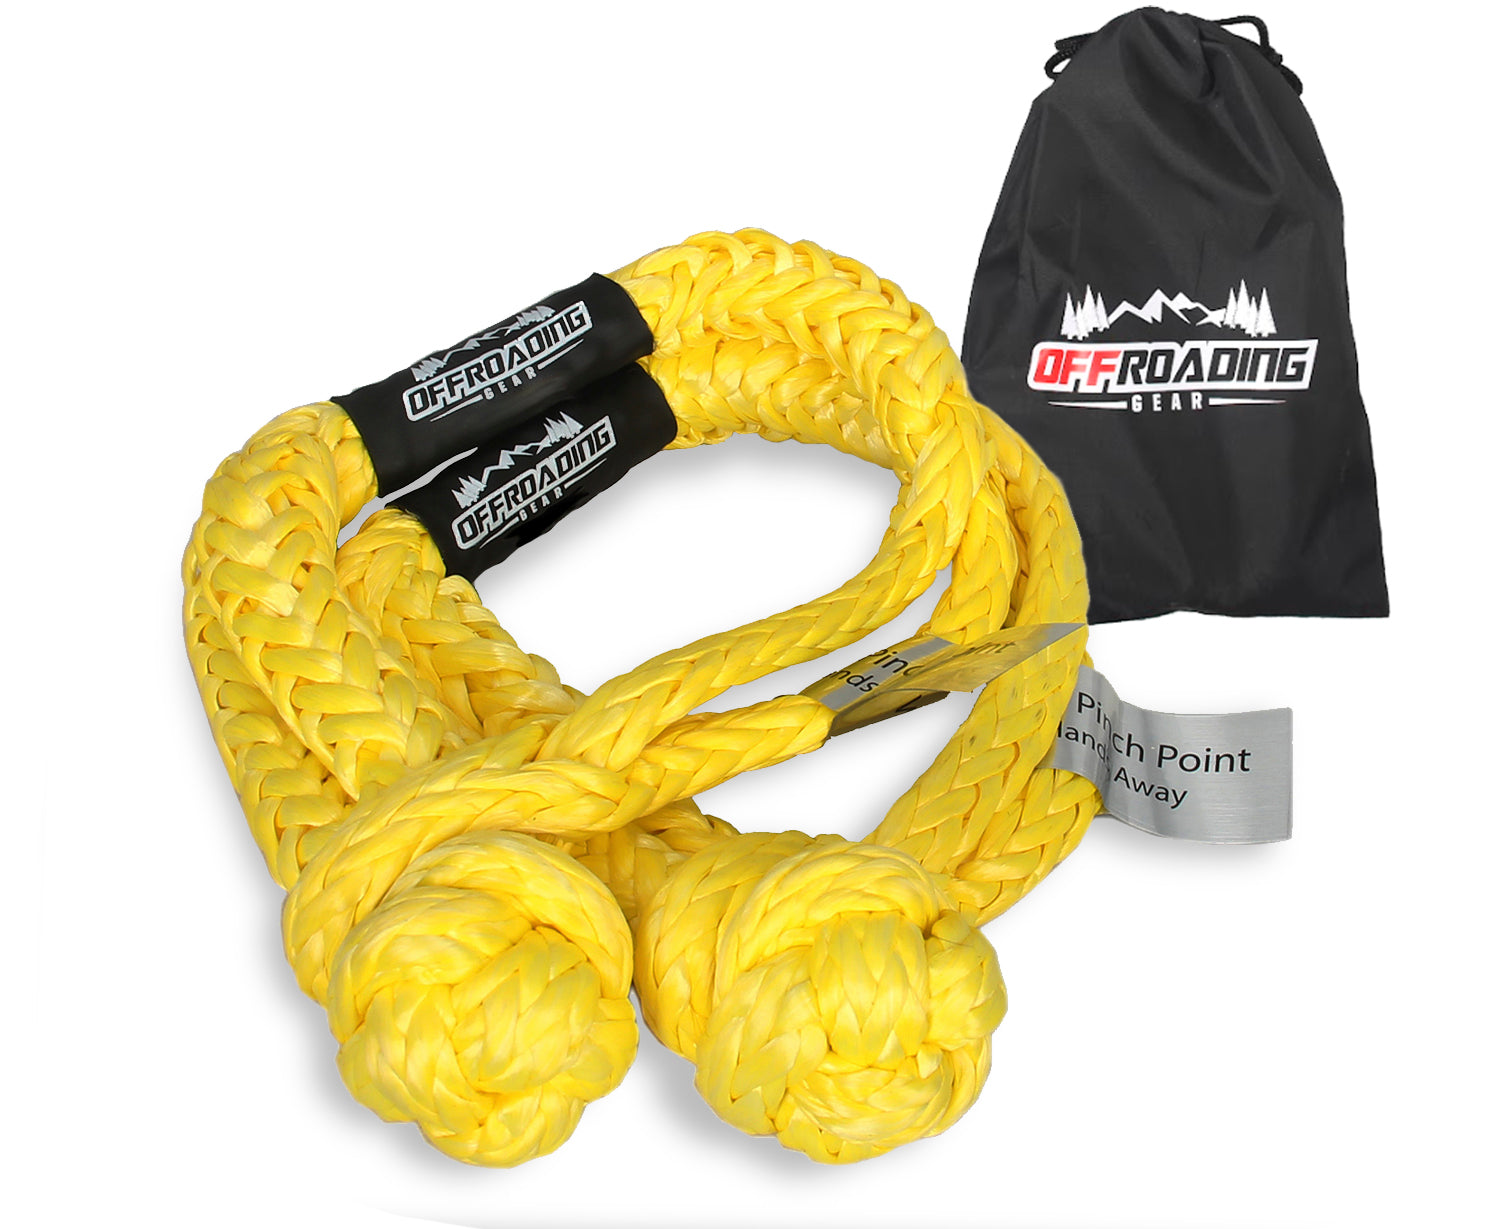 Offroading Gear Set of Two Synthetic Soft Rope Shackles w/Free